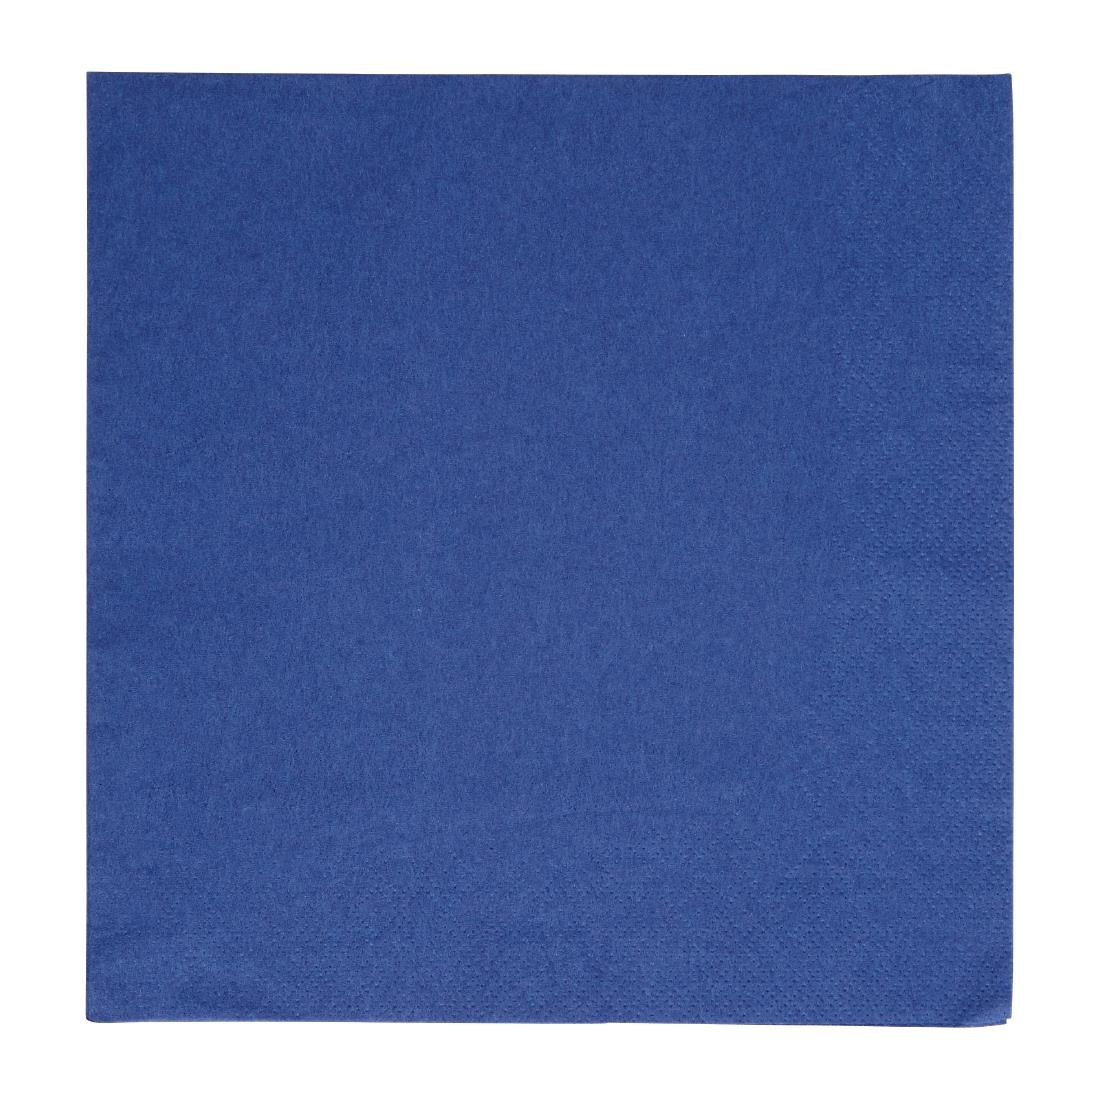 FE240 Fiesta Recyclable Dinner Napkin Dark Blue 40x40cm 2ply 1/4 Fold (Pack of 2000) JD Catering Equipment Solutions Ltd